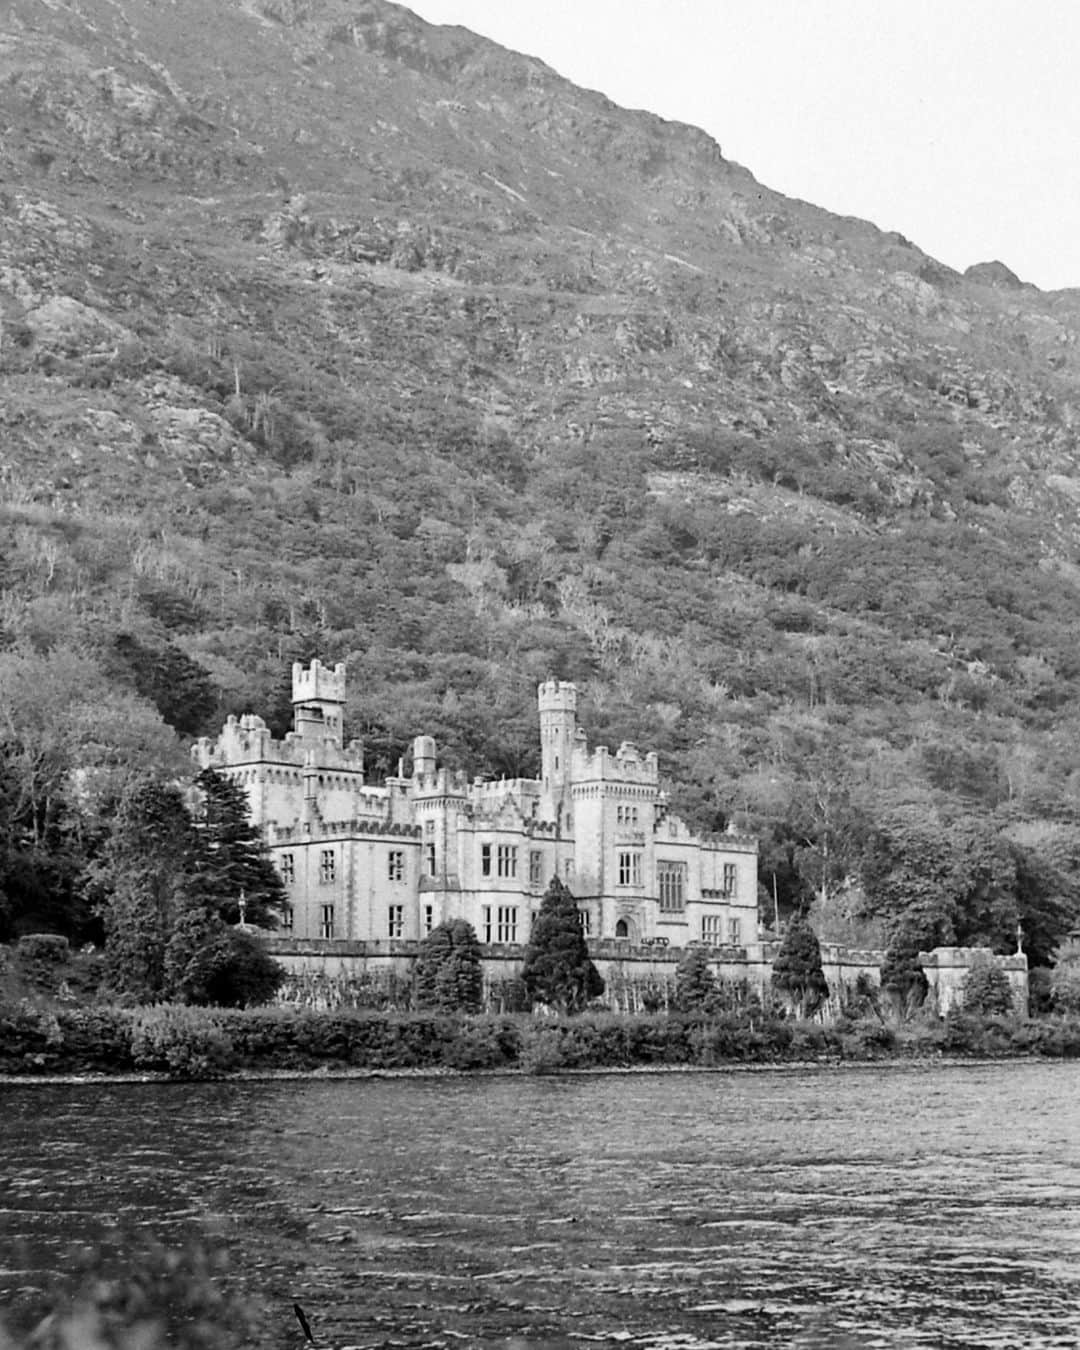 lifeのインスタグラム：「Image of Kylemore Abbey taken by LIFE photographer Hans Wild for an essay about Ireland, 1946.   Visit the link in bio to see more dreamy destinations from the LIFE Archive! ☘️  (📷 Hans Wild/LIFE Picture Collection)   #LIFEMagazine #LIFEArchive #LIFEPictureCollection #HansWild #Ireland #KylemoreAbbey #Destinations #1940s」